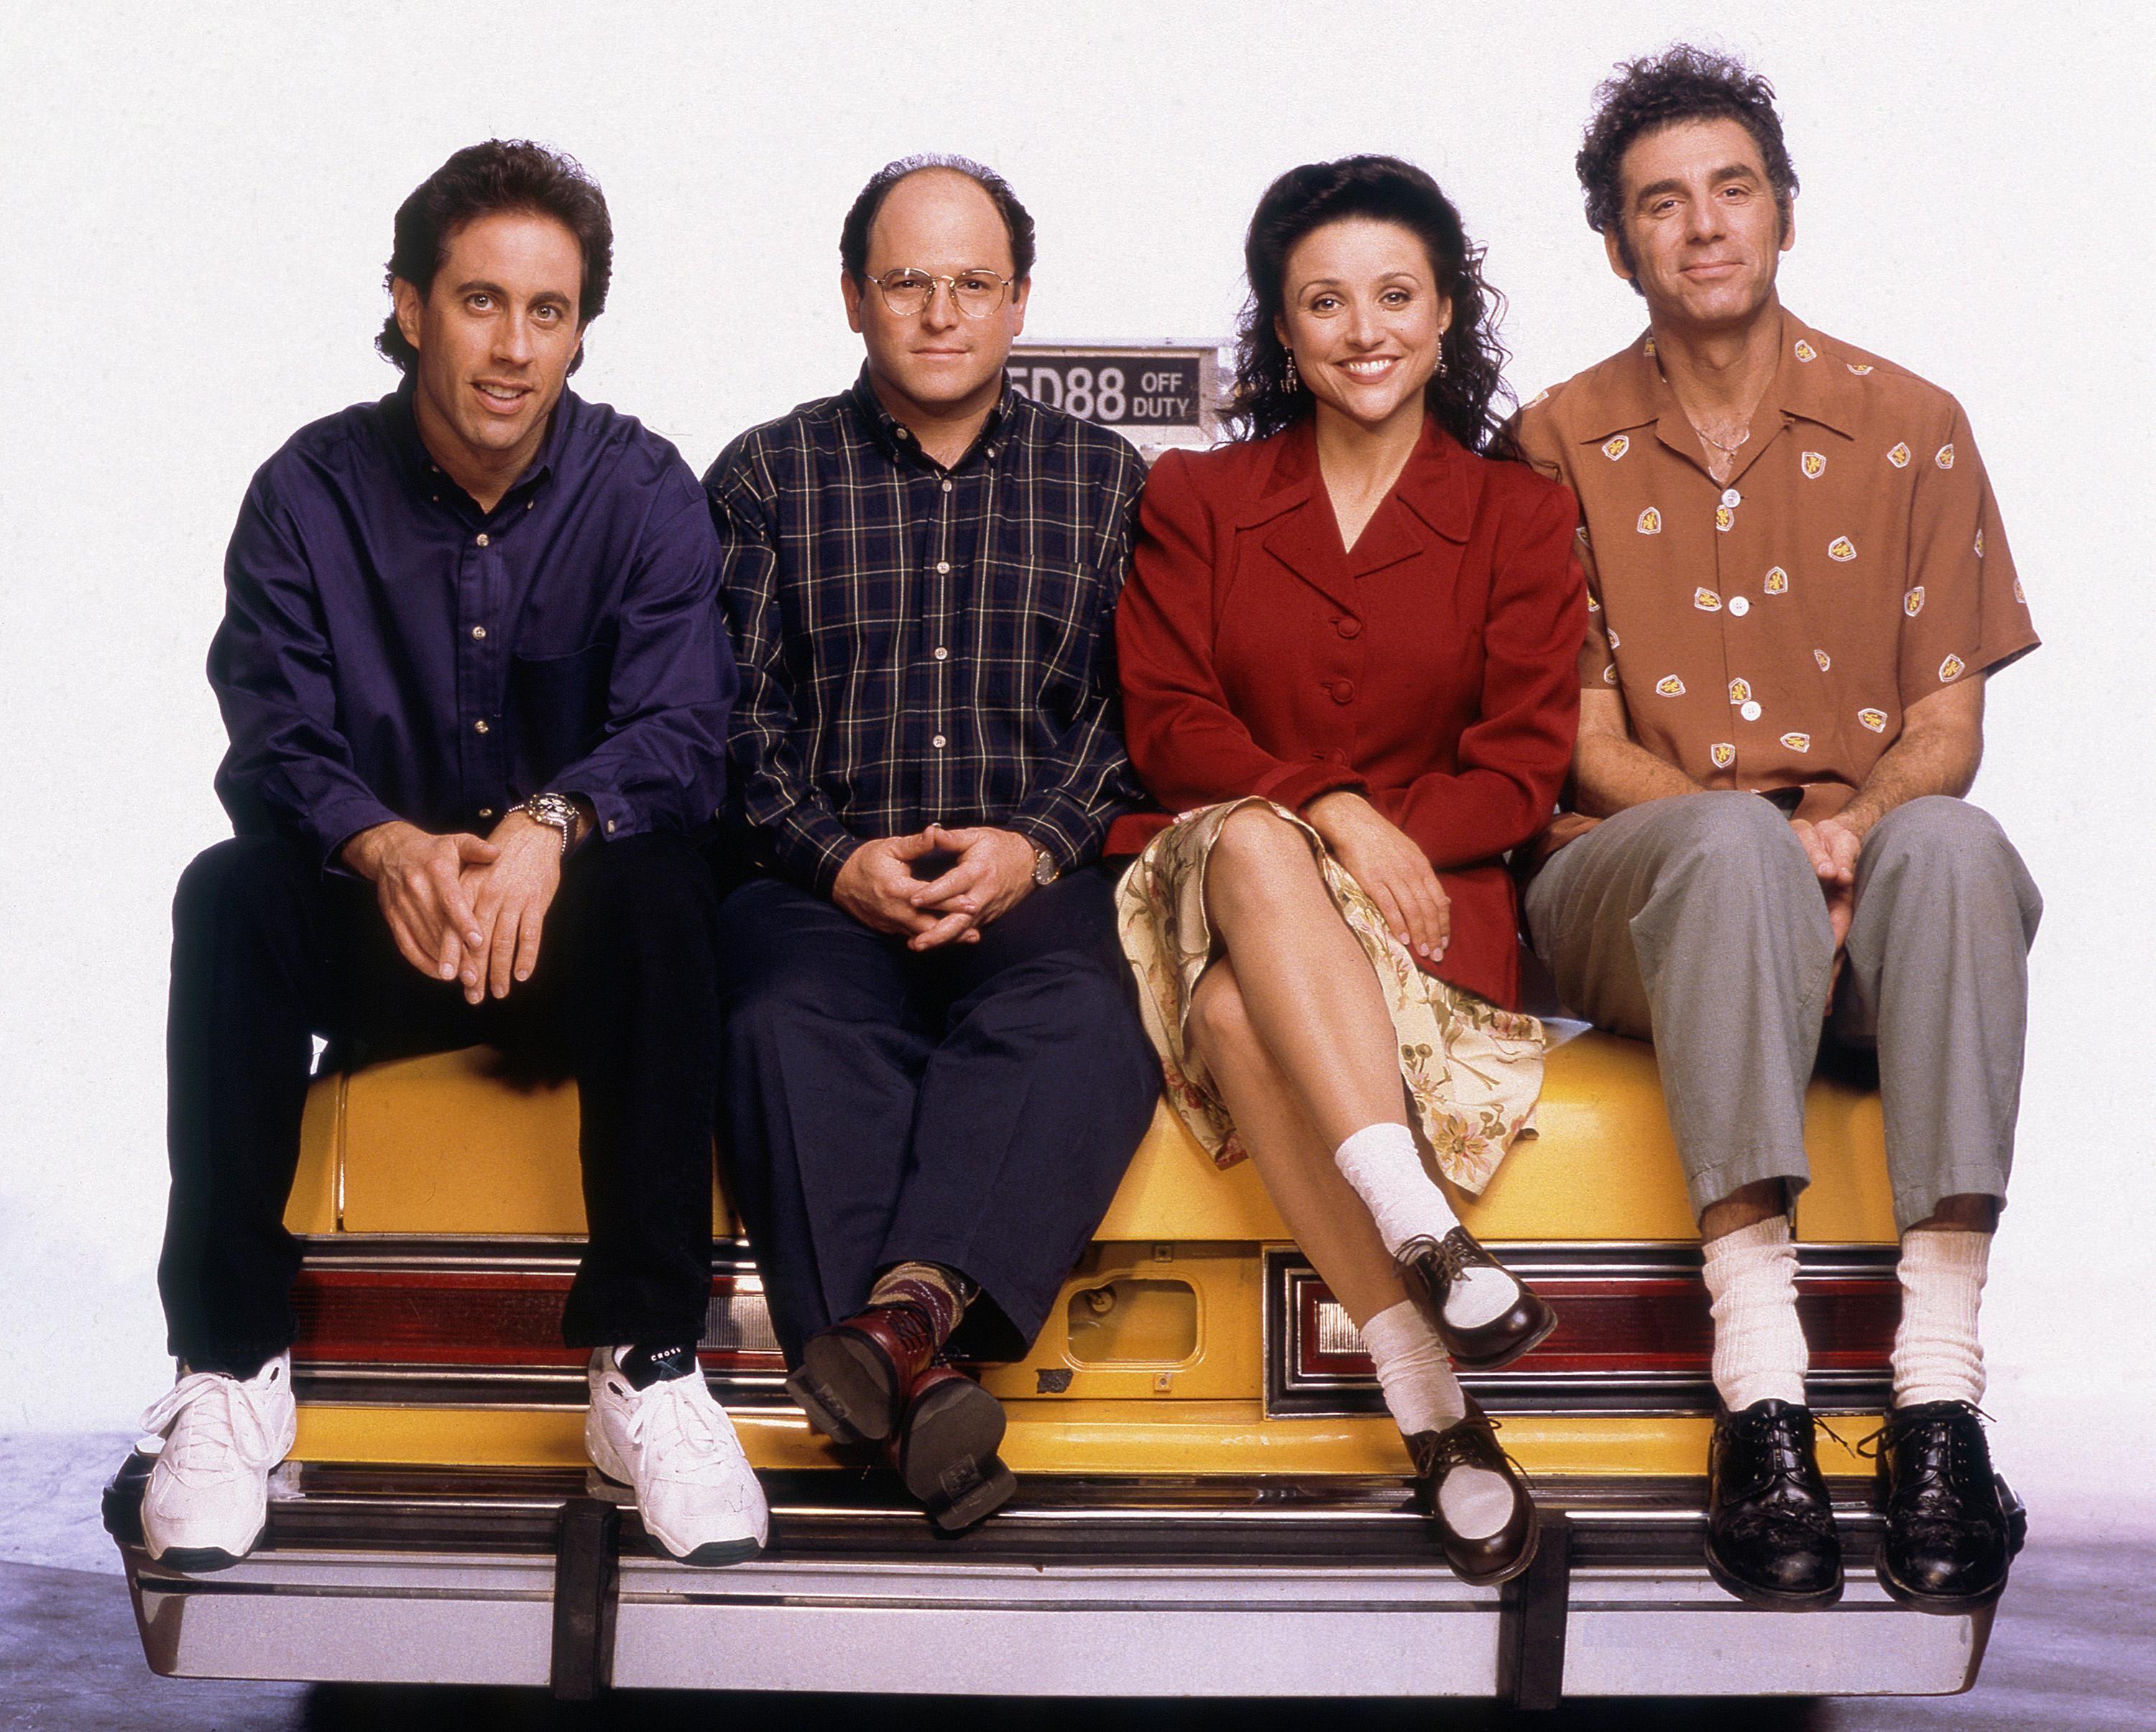 Seinfeld wallpapers for desktop download free Seinfeld pictures and  backgrounds for PC  moborg